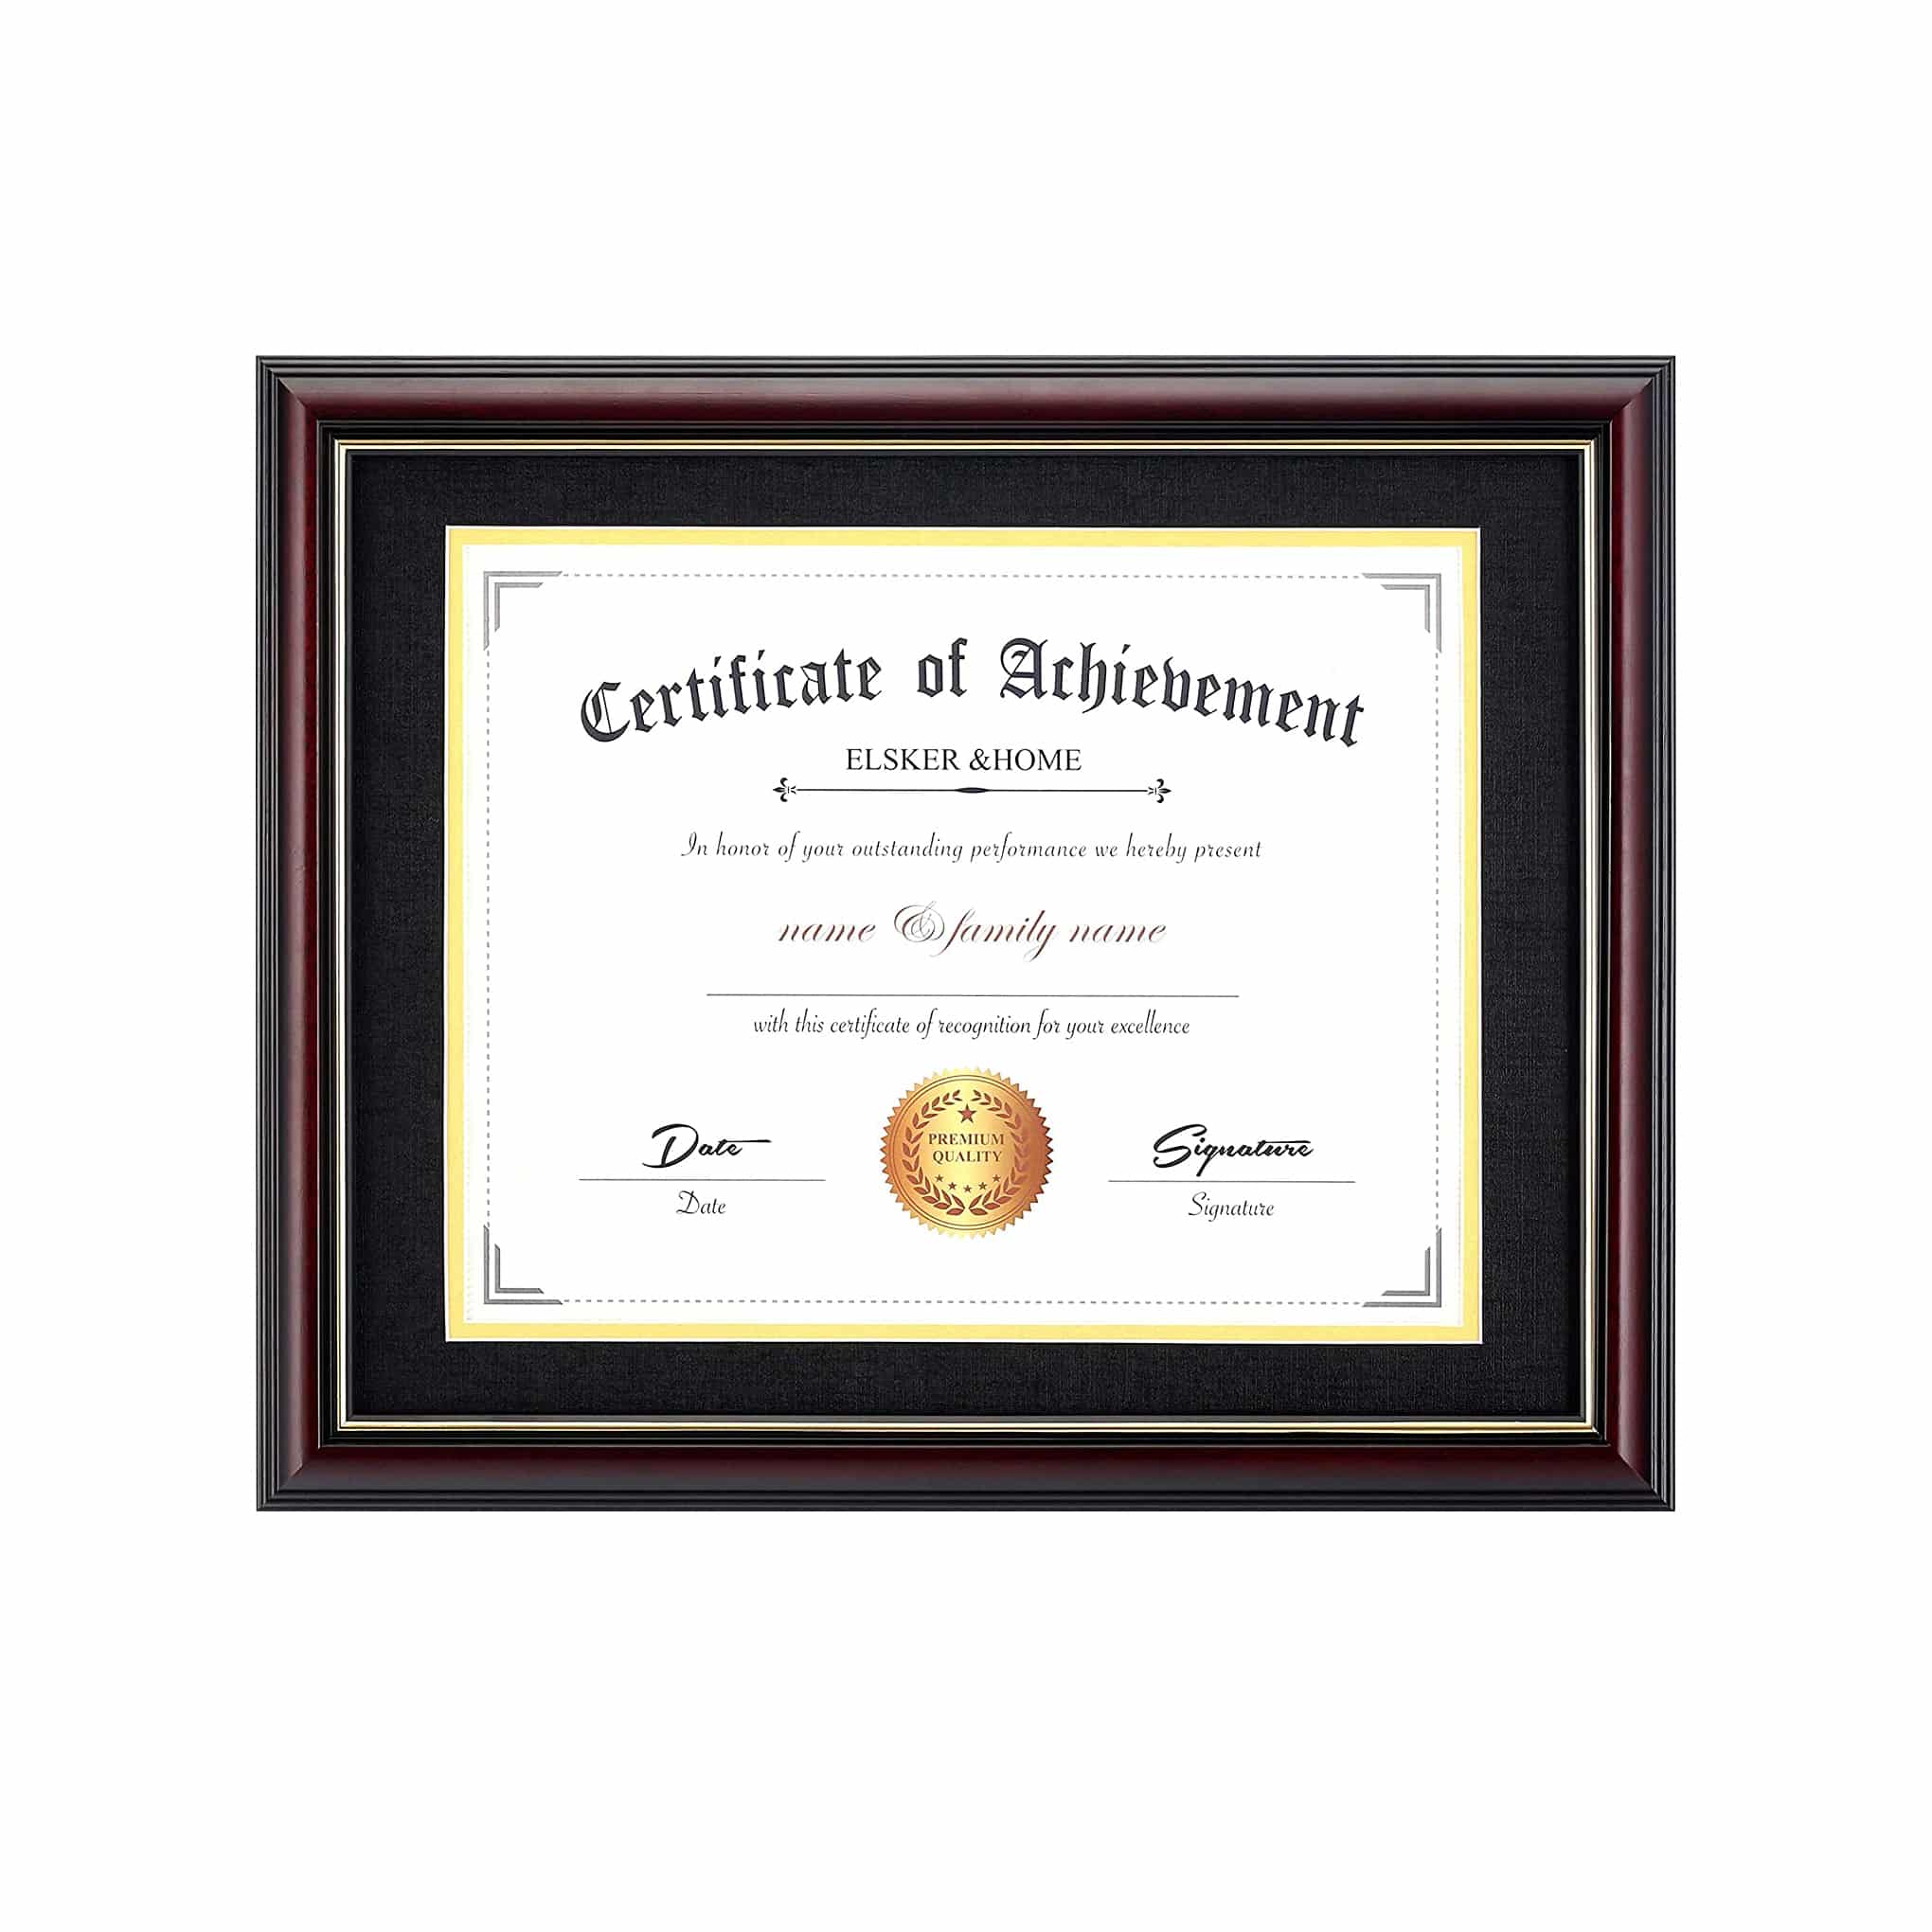 Top 10 Best Certificate Frames in 2021 Reviews - Go On Products